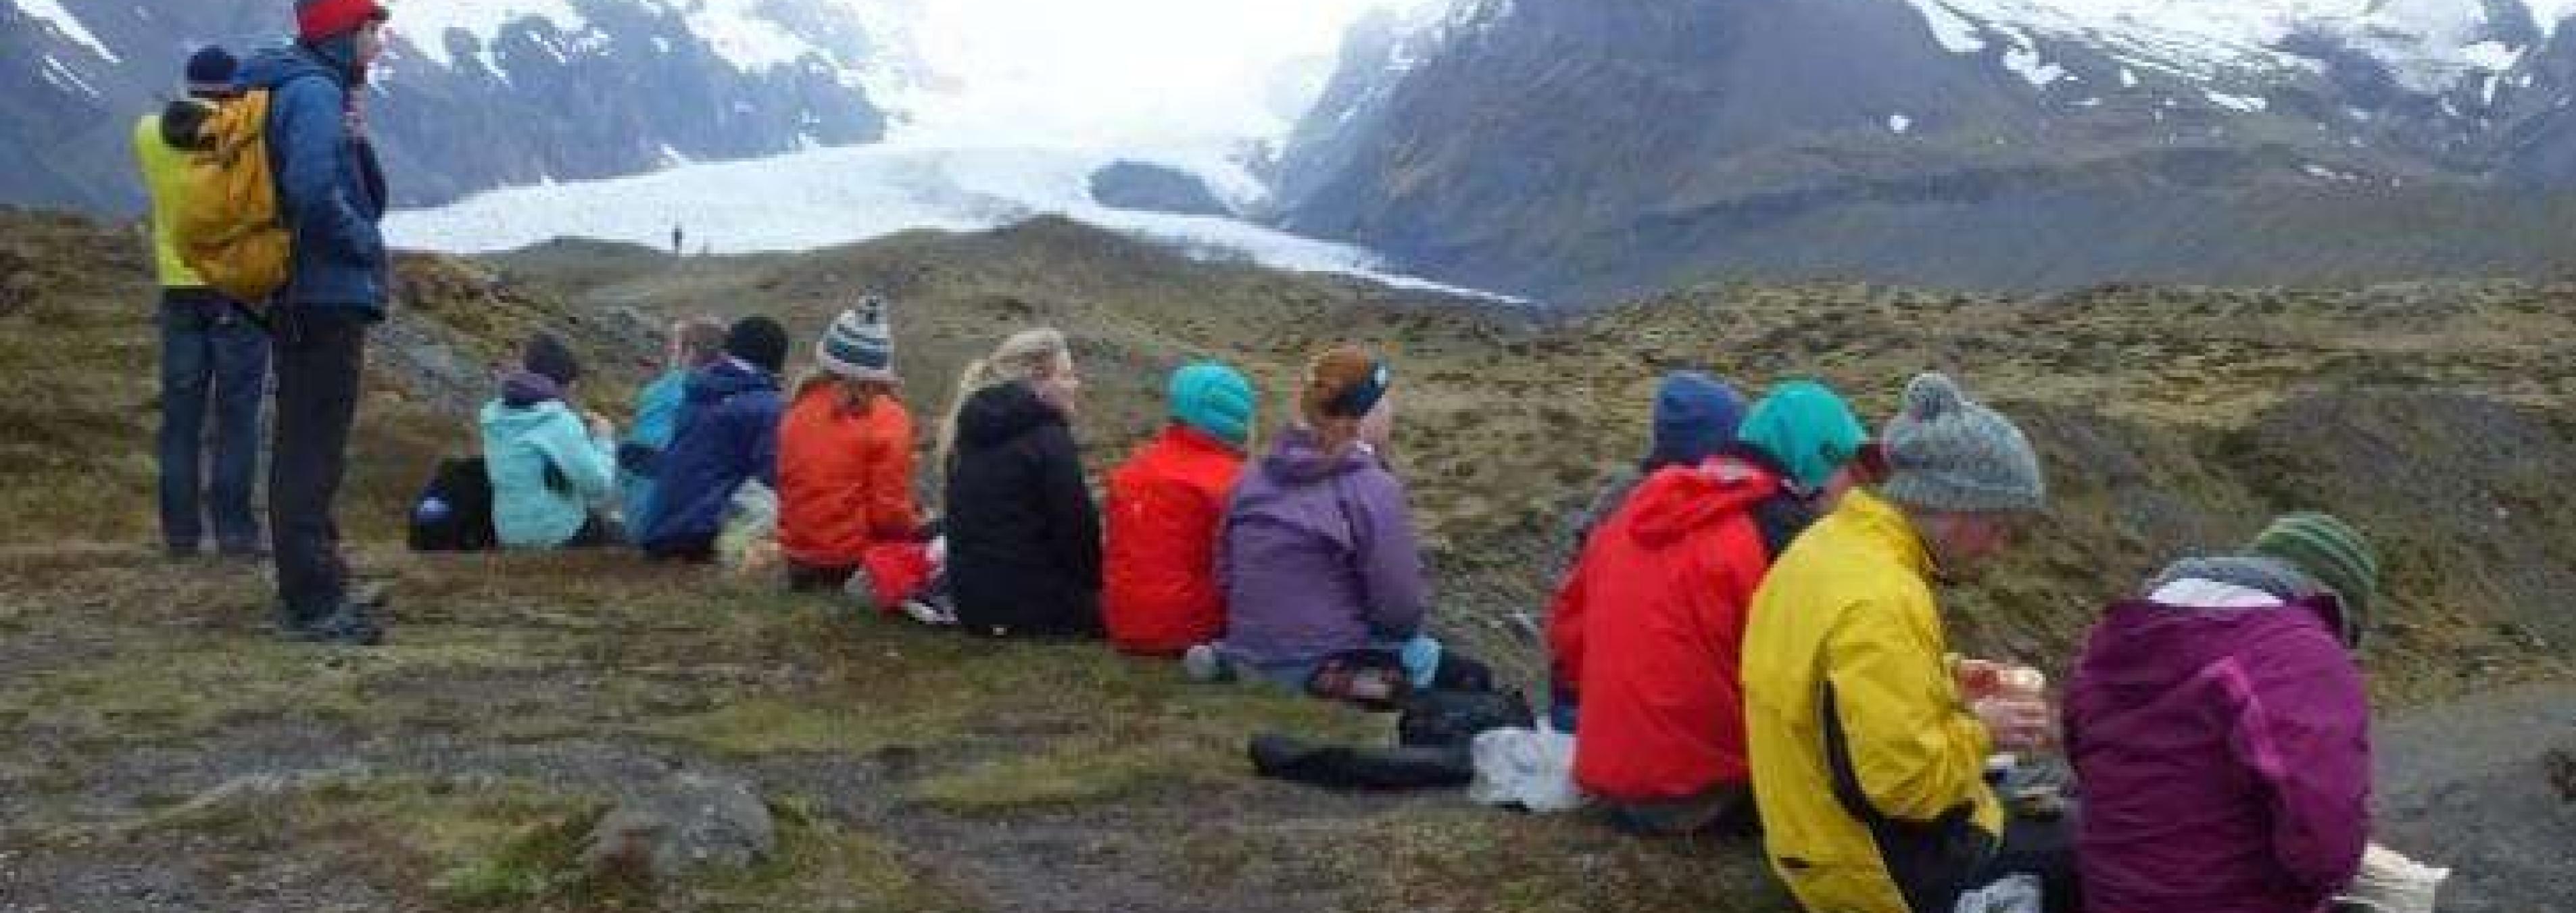 Students on a 2015 Georneys trip to Iceland